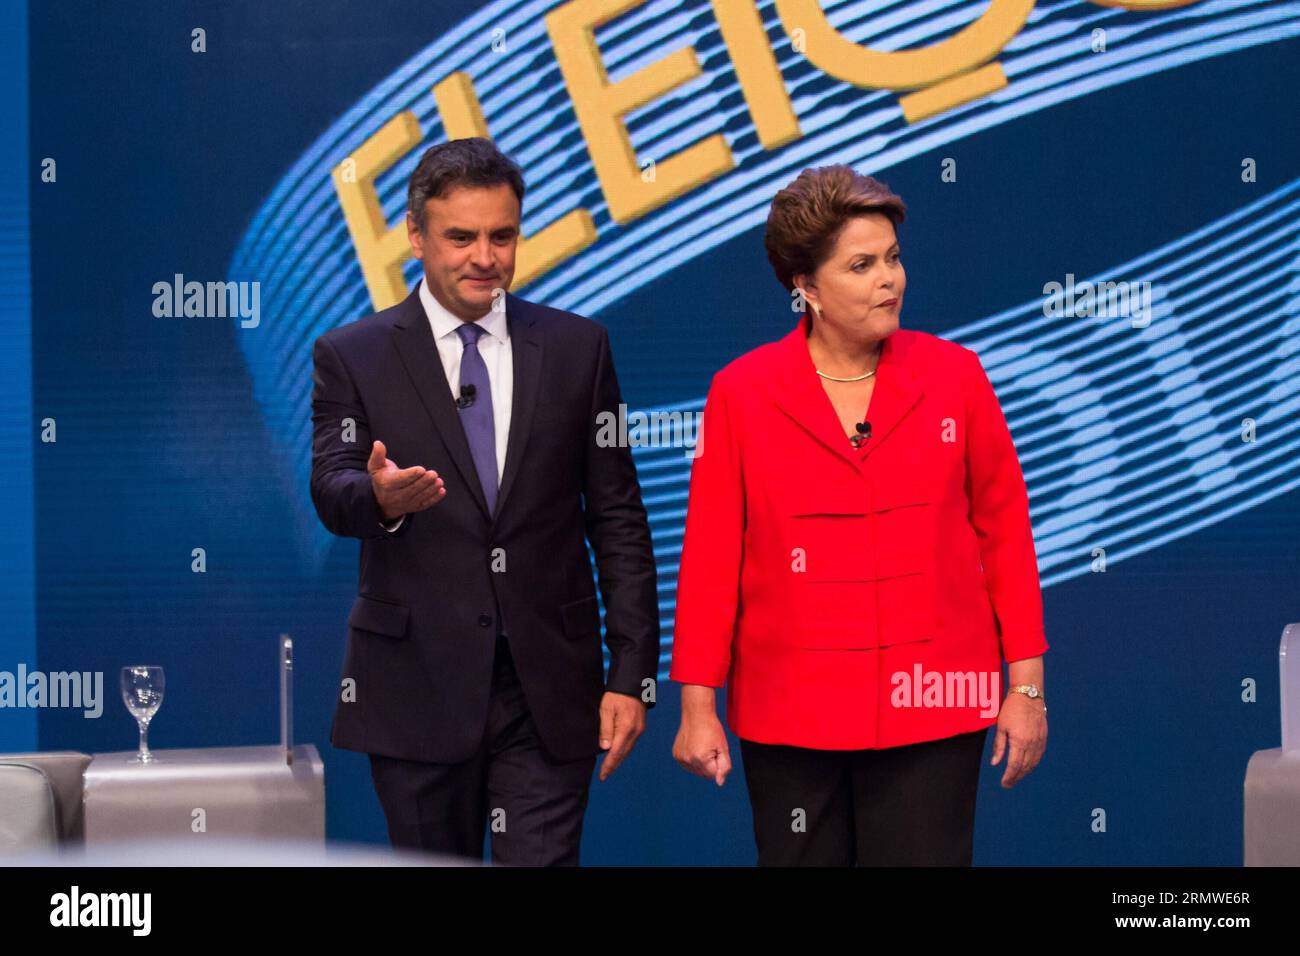 Brazil s President and presidential candidate for the Worker s Party (PT) Dilma Rousseff (R) and candidate for Brazilian Social Democratic Party (PSDB) Aecio Neves attend a television debate in Jacarepagua, west of Rio de Janeiro, Brazil, on Oct. 24, 2014. Brazil s presidential election will be defined on a second round, on Oct. 26, between Dilma Rousseff of PT and Aecio Neves of PSDB. Gustavo Serebrenick/Brazil Photo Press/Estadao Conteudo/AGENCIA ESTADO) (zhf) BRAZIL OUT BRAZIL-RIO DE JANEIRO-POLITICS-ELECTIONS AGENCIAxESTADIO PUBLICATIONxNOTxINxCHN   Brazil S President and Presidential Cand Stock Photo